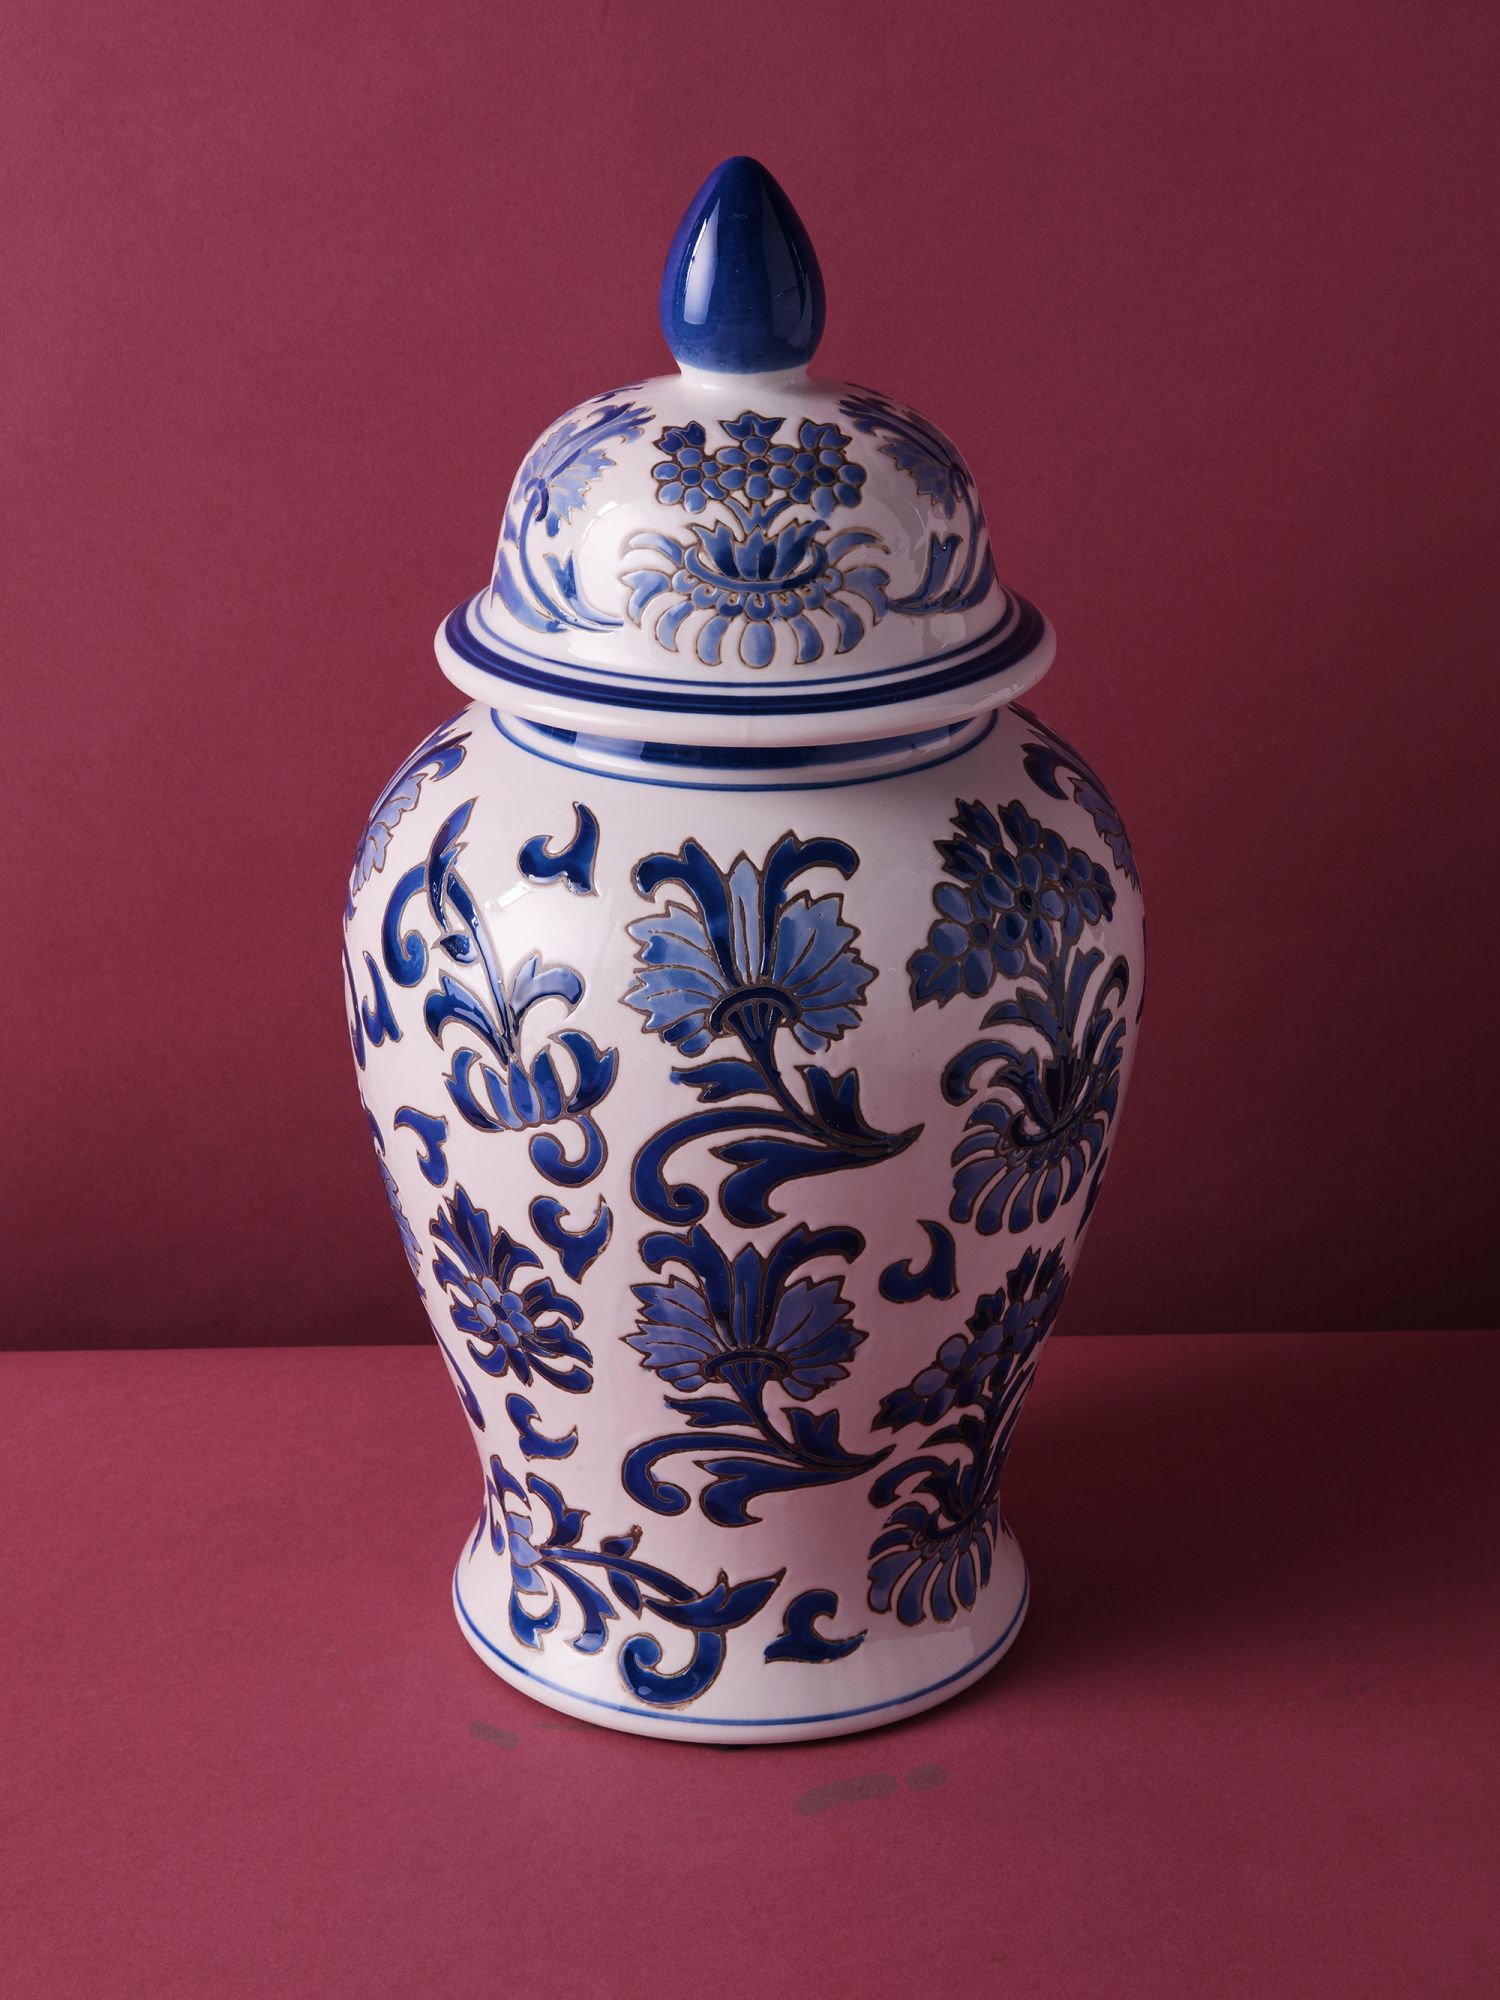 19in Ceramic Temple Jar | Decorative Objects | HomeGoods | HomeGoods